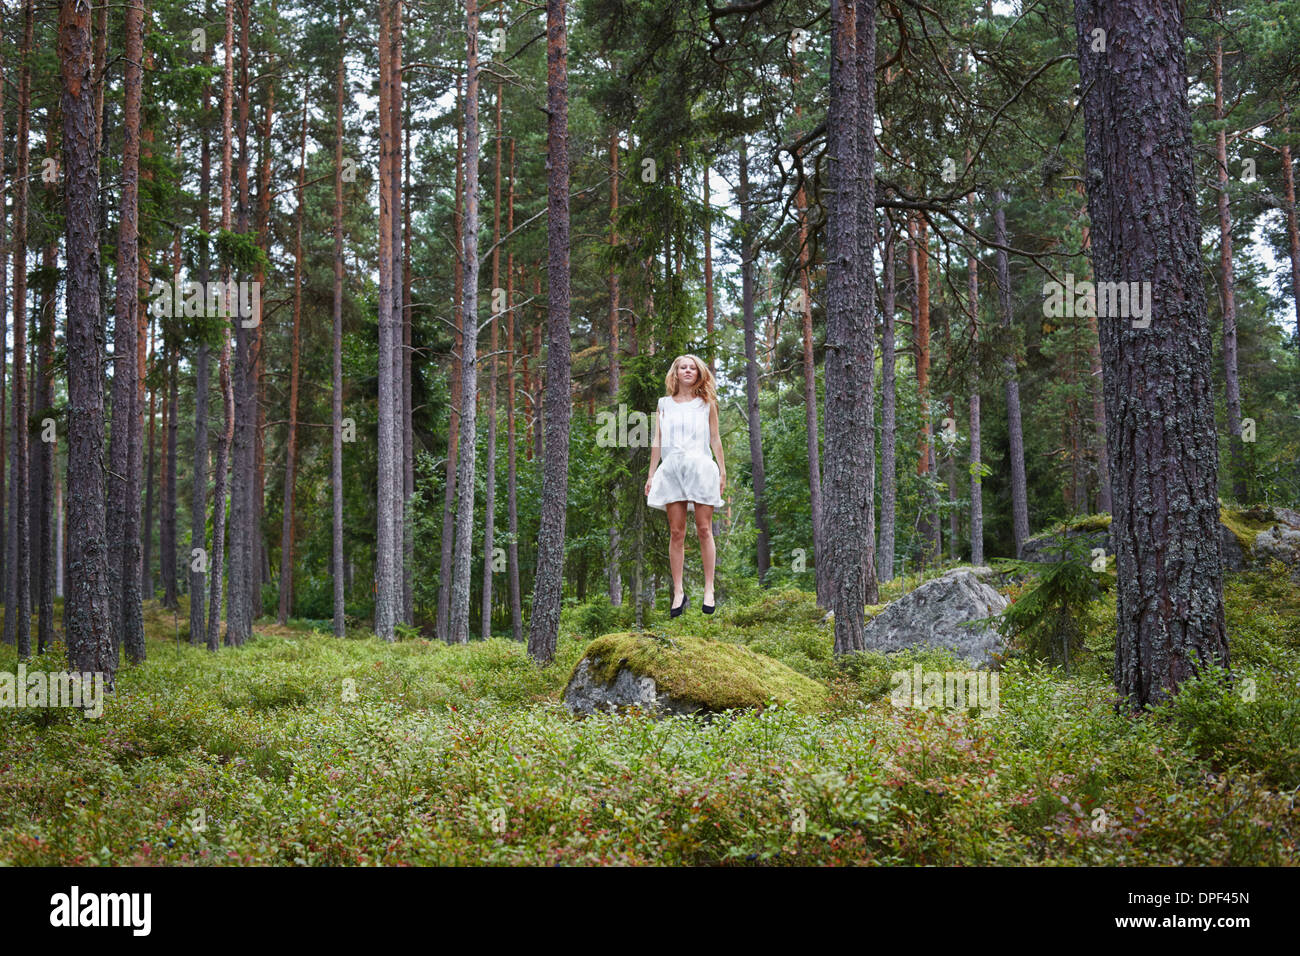 Teenage girl jumping in forest Stock Photo